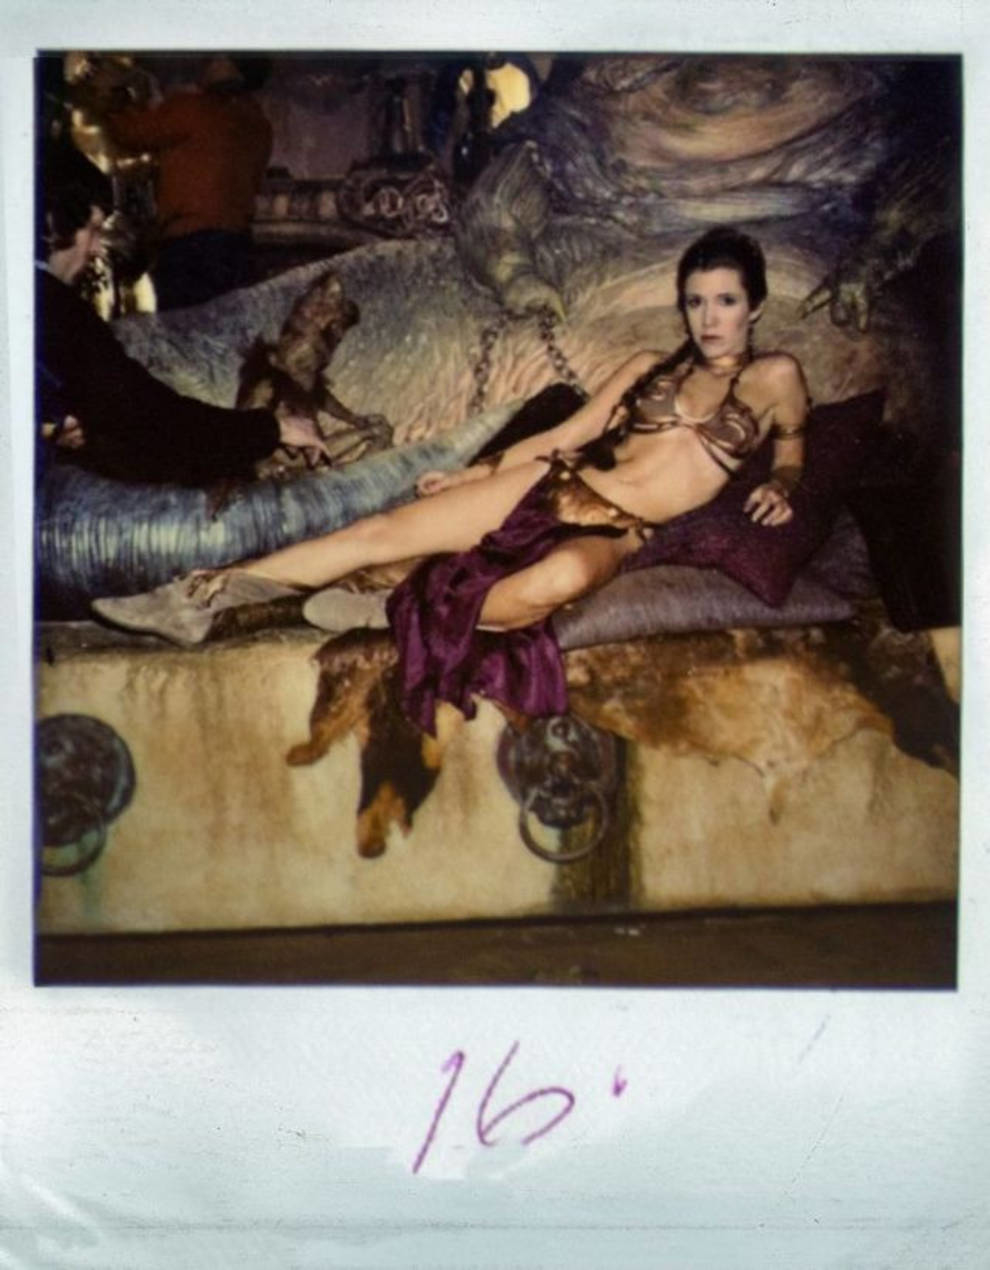 The Jedi Return: The Polaroid Pictures of 1982